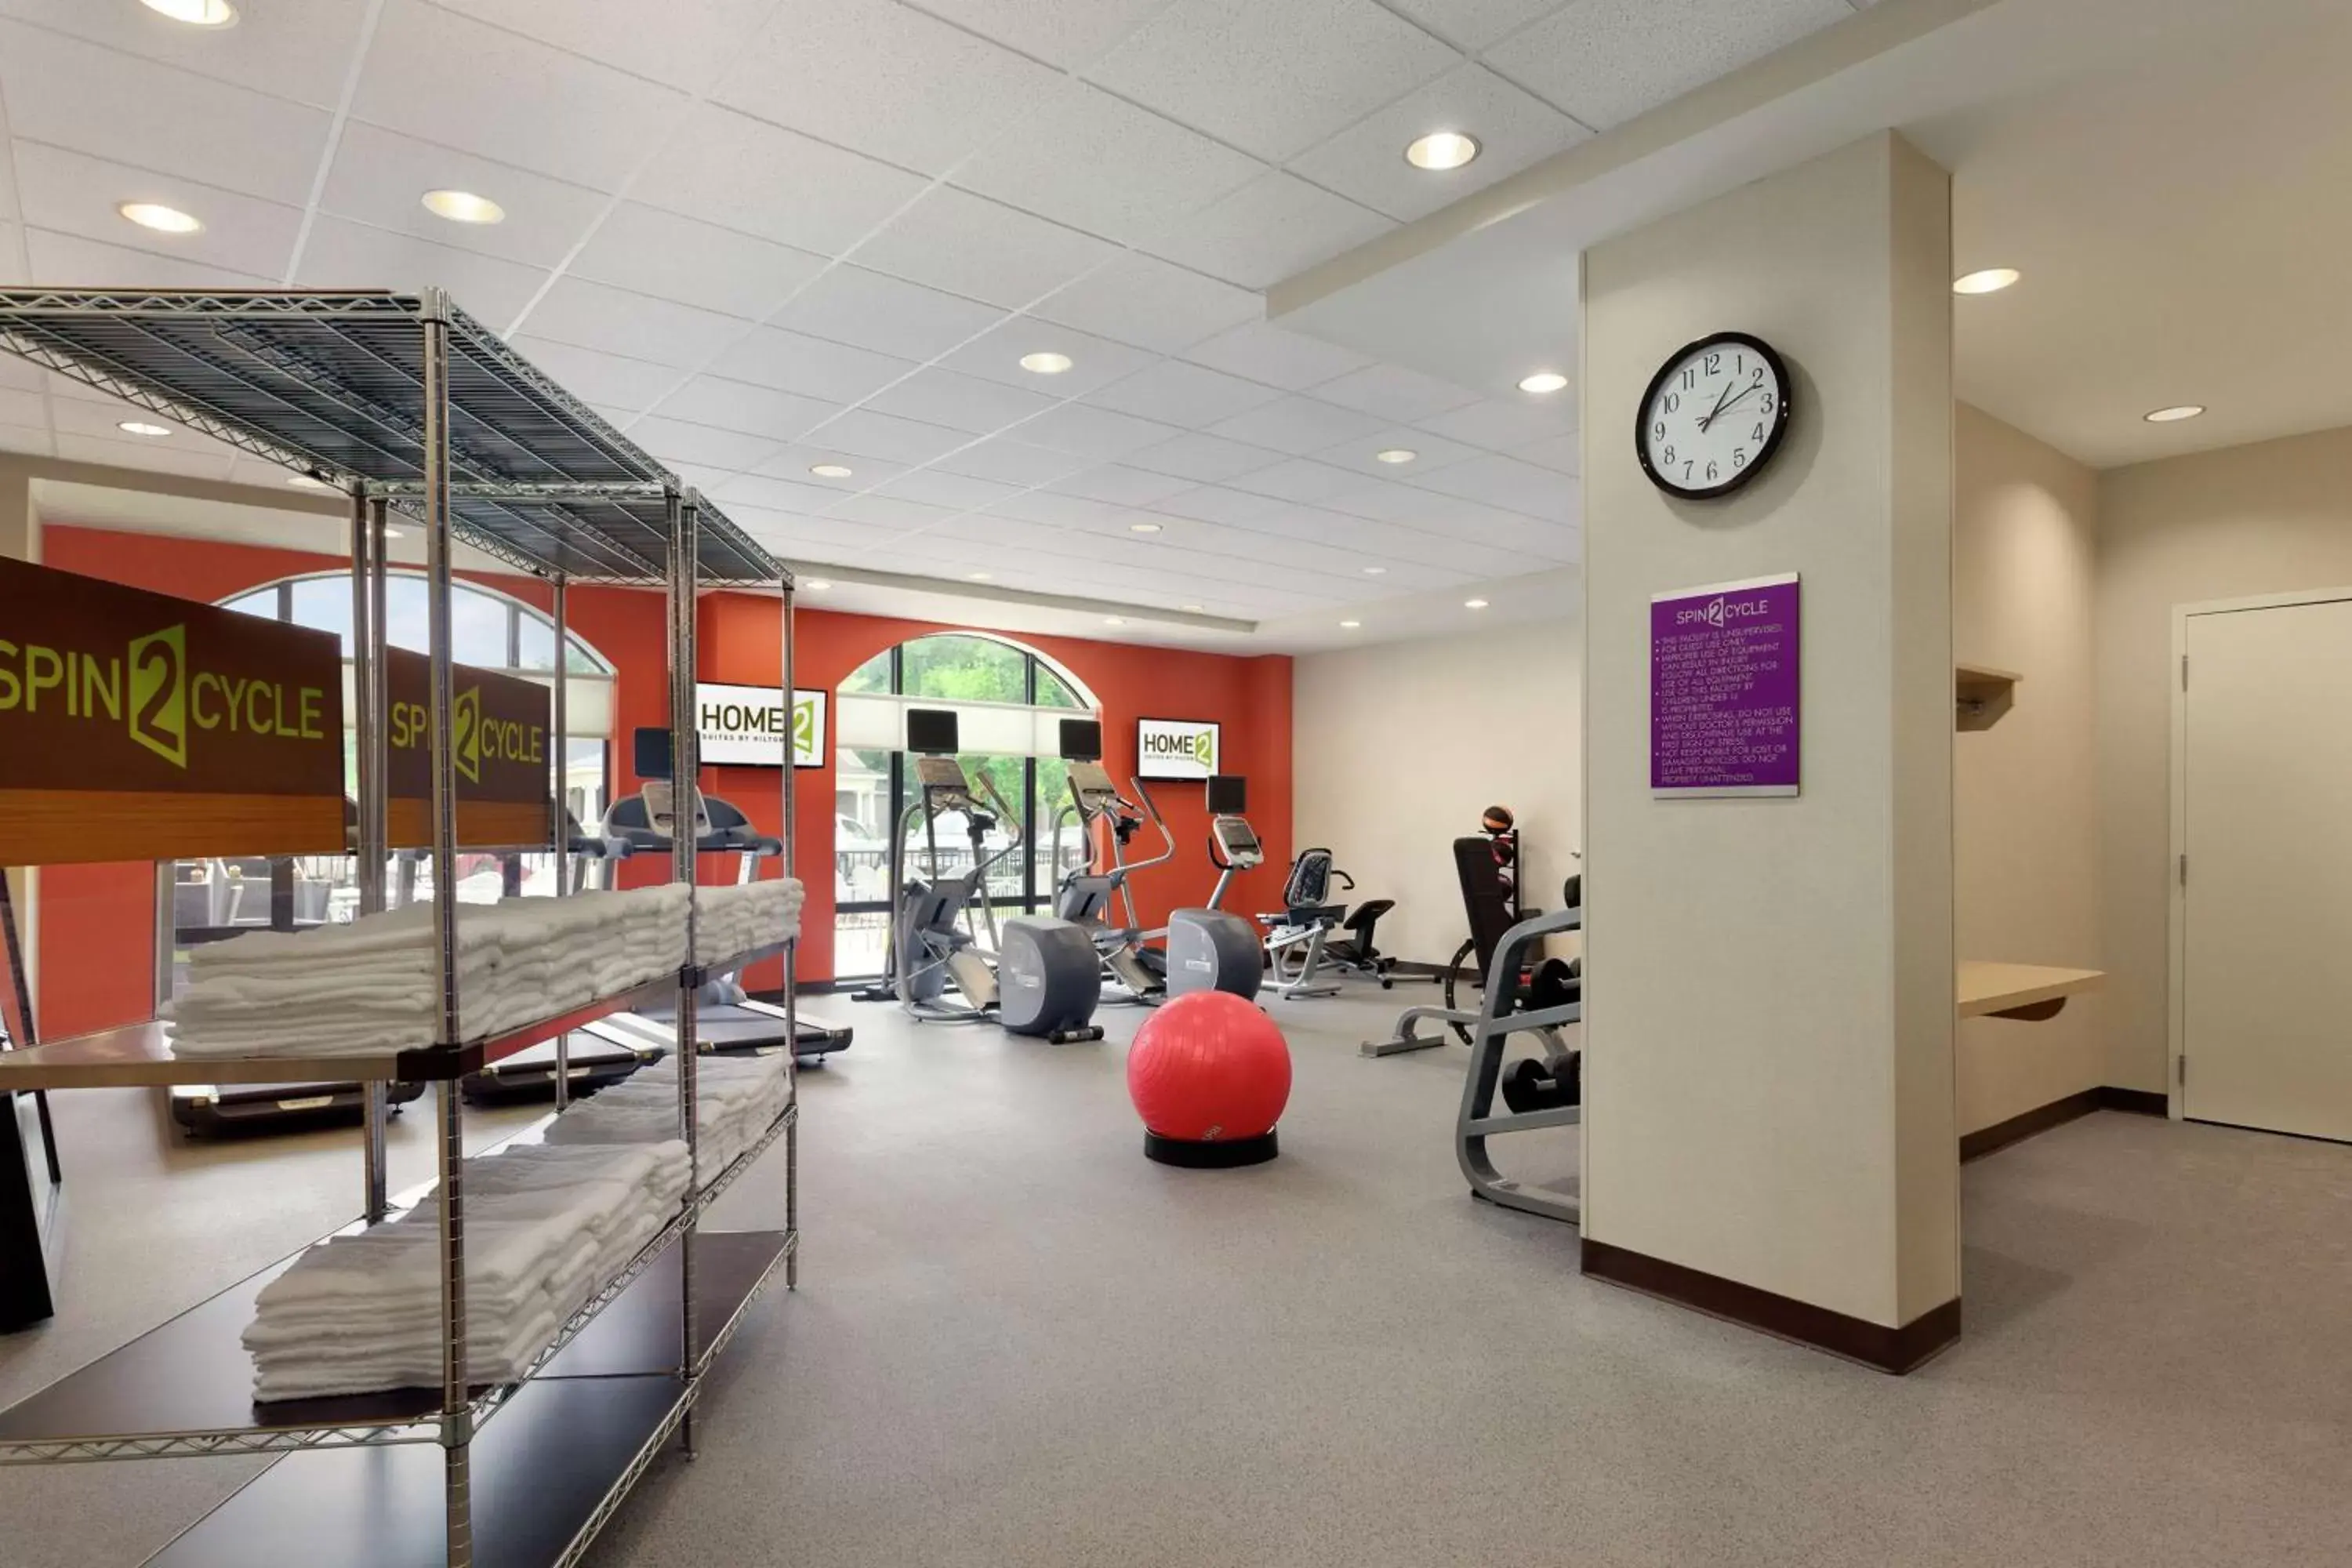 Fitness centre/facilities, Fitness Center/Facilities in Home2 Suites by Hilton Tuscaloosa Downtown University Boulevard